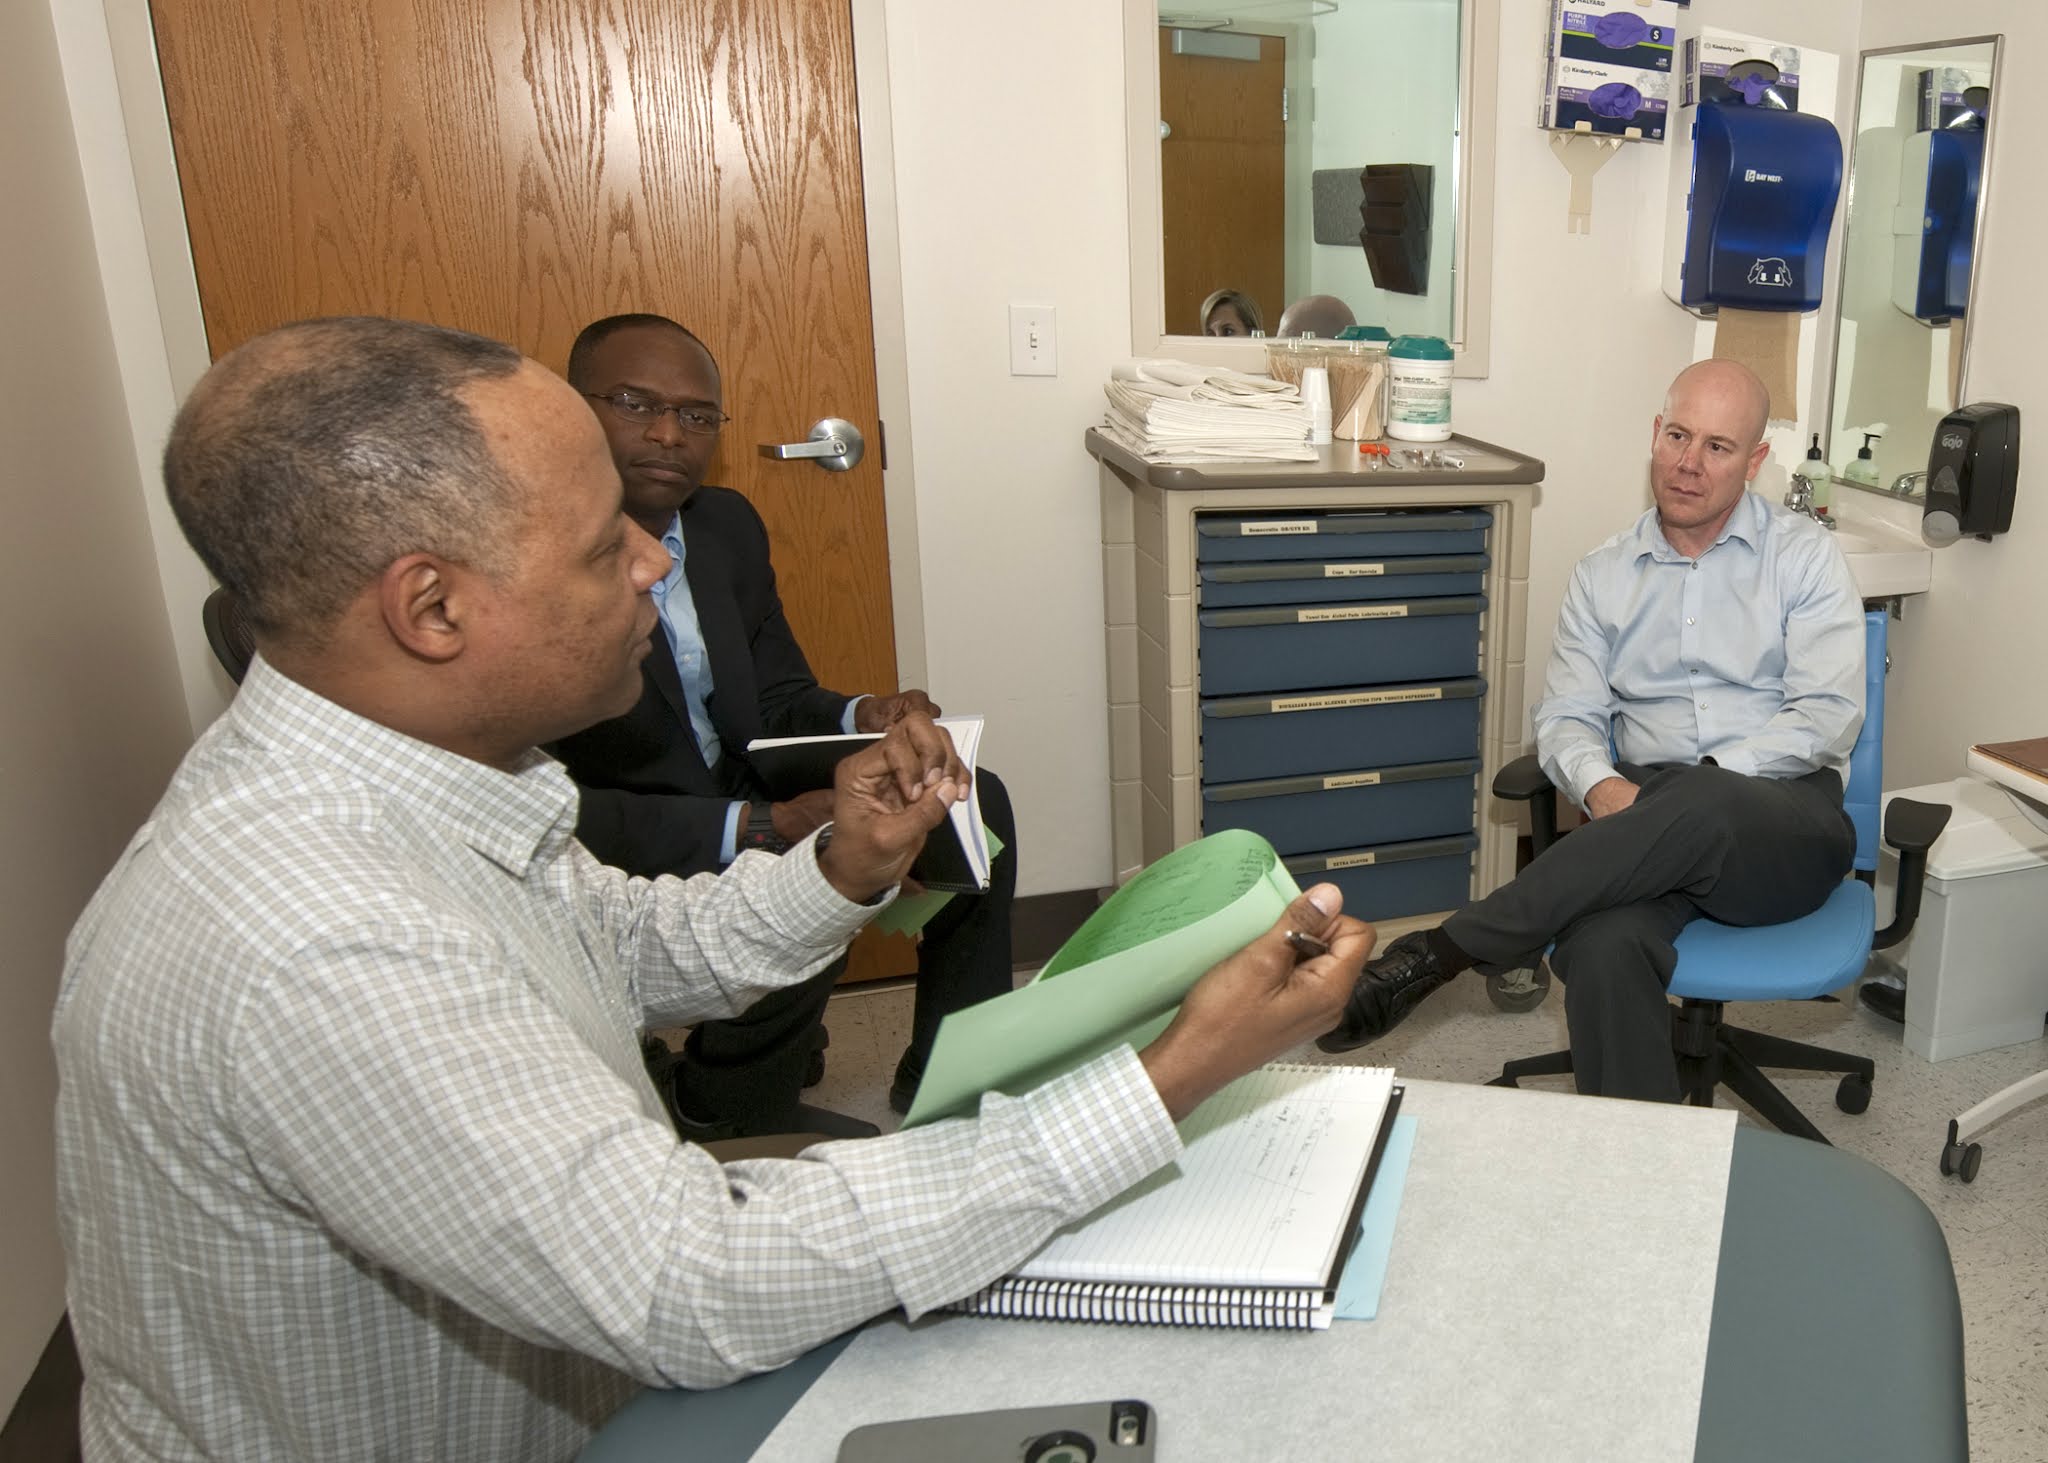 Three men sit in an office and speak with each other about the Chaplains-CARE course.